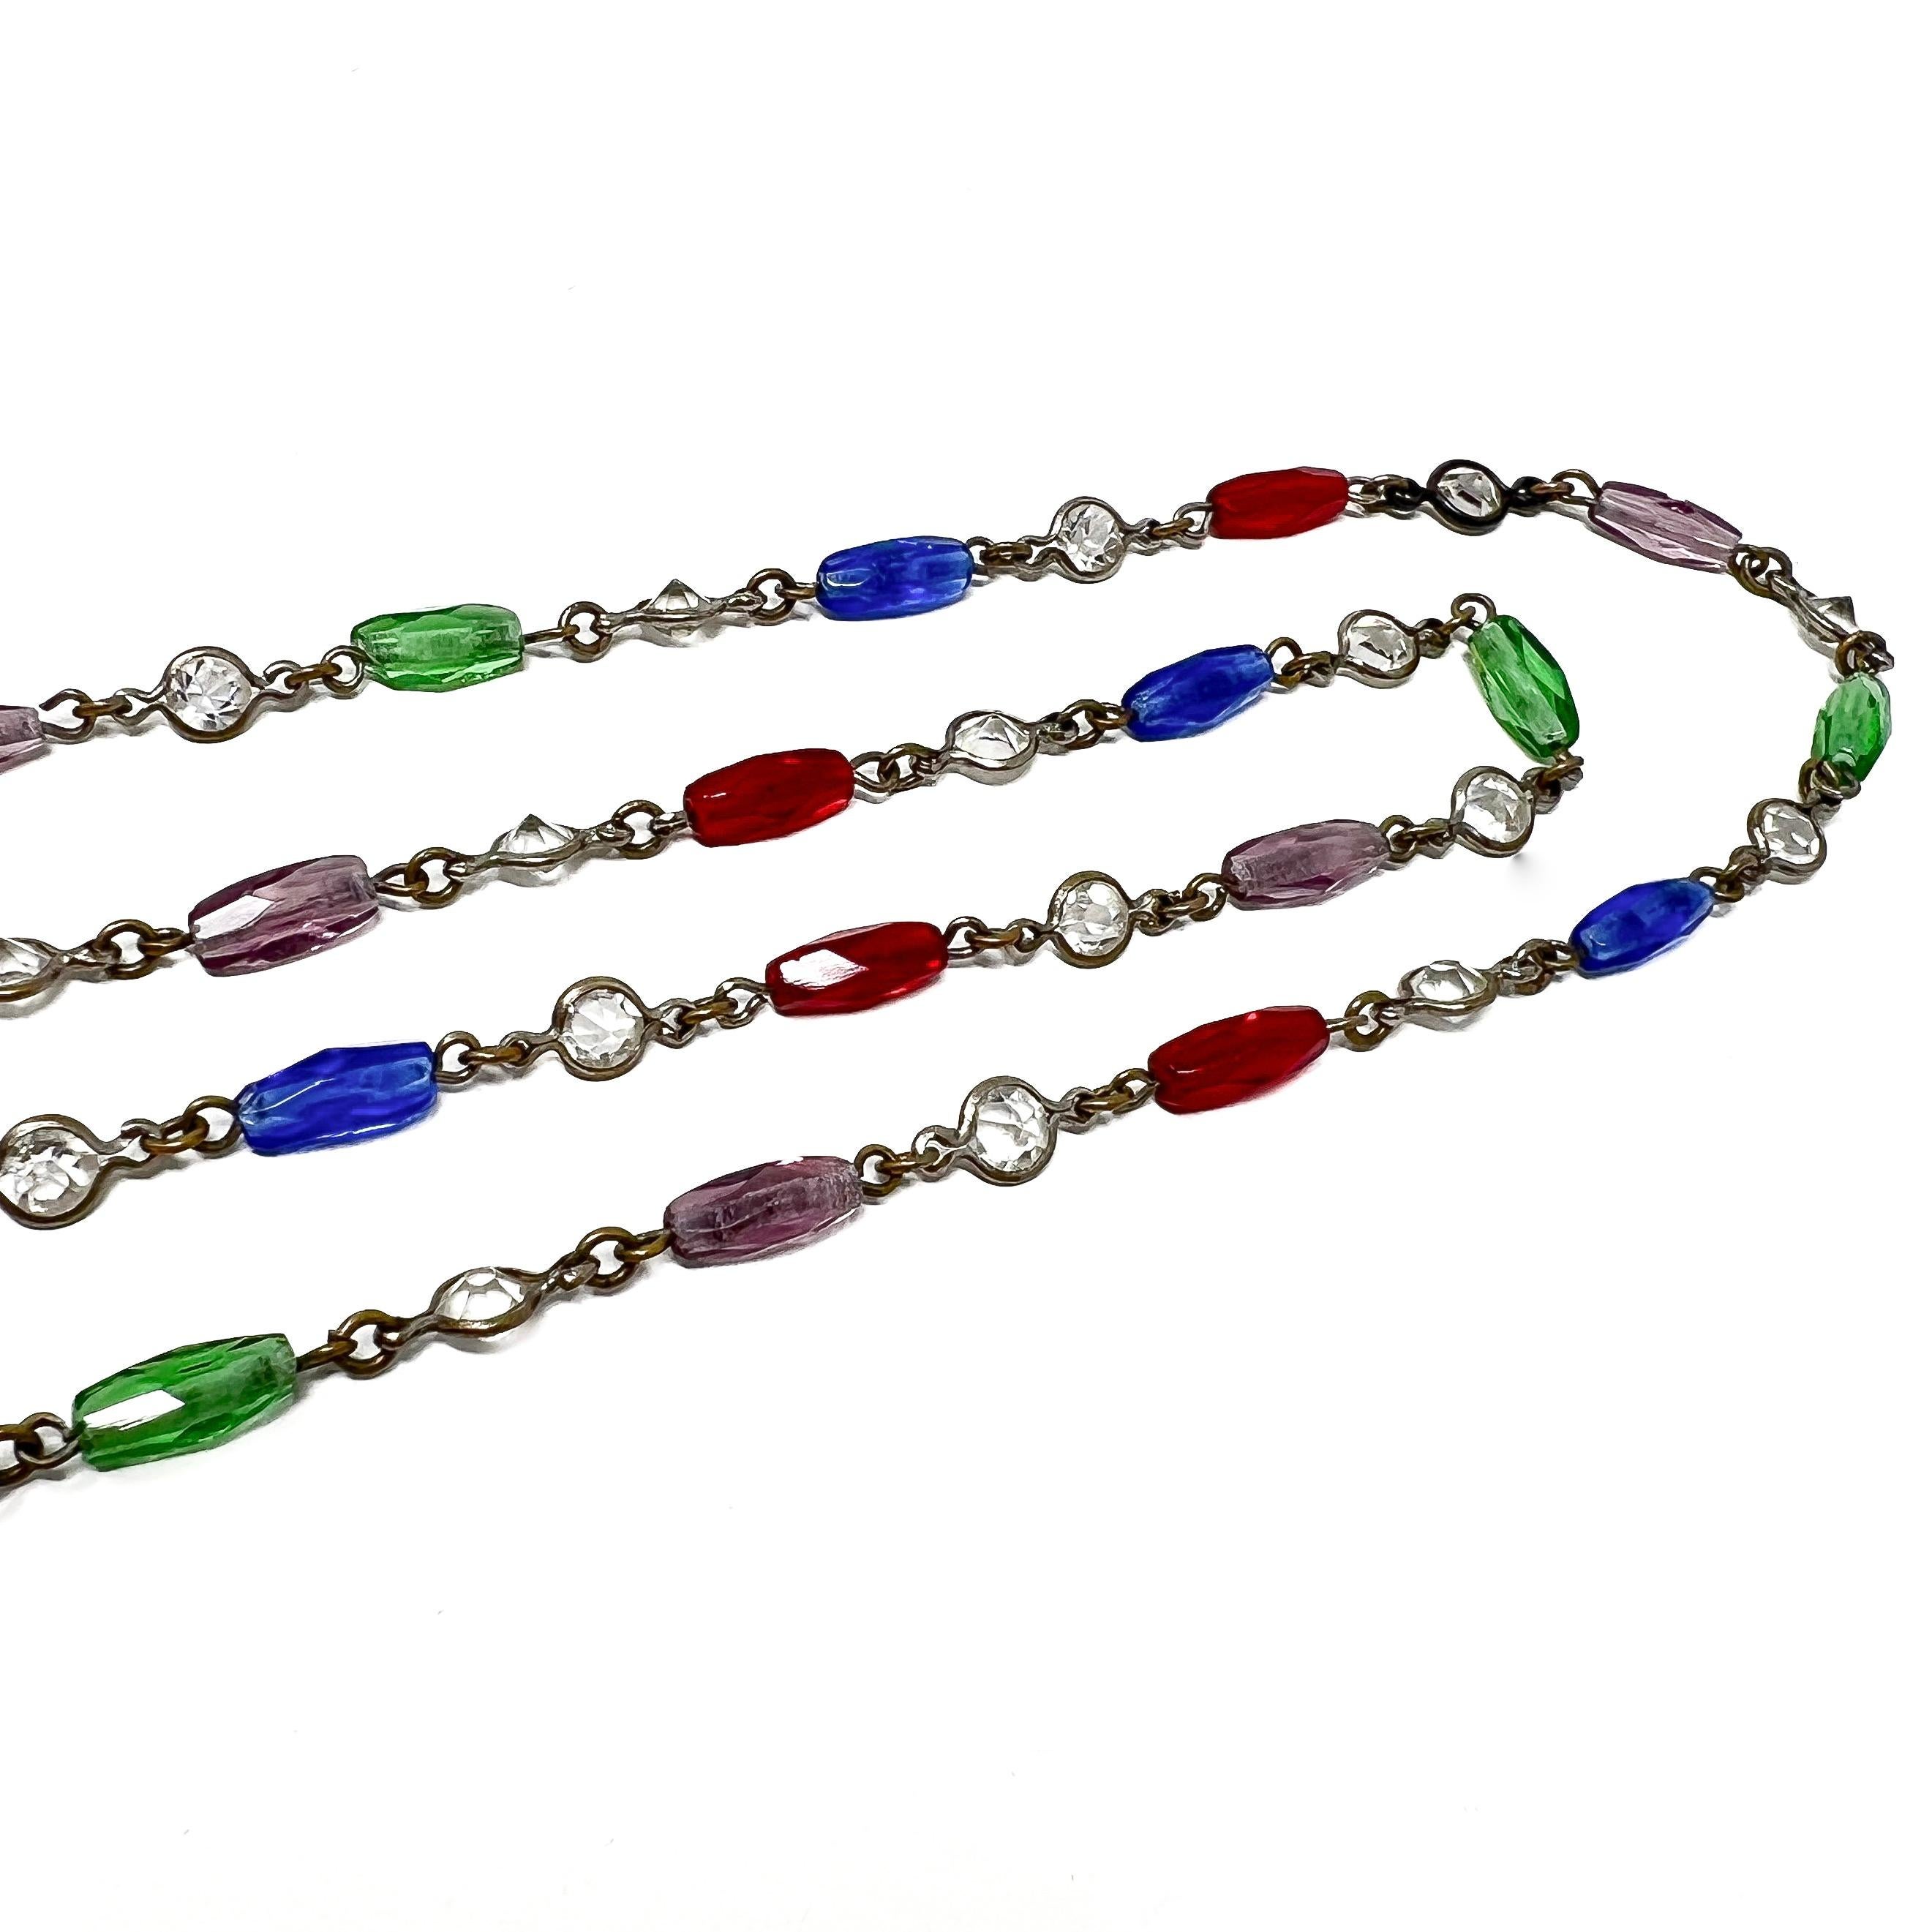 Edwardian c.1900 Crystal and Multi-Coloured Glass Antique Long Guard Chain For Sale 2